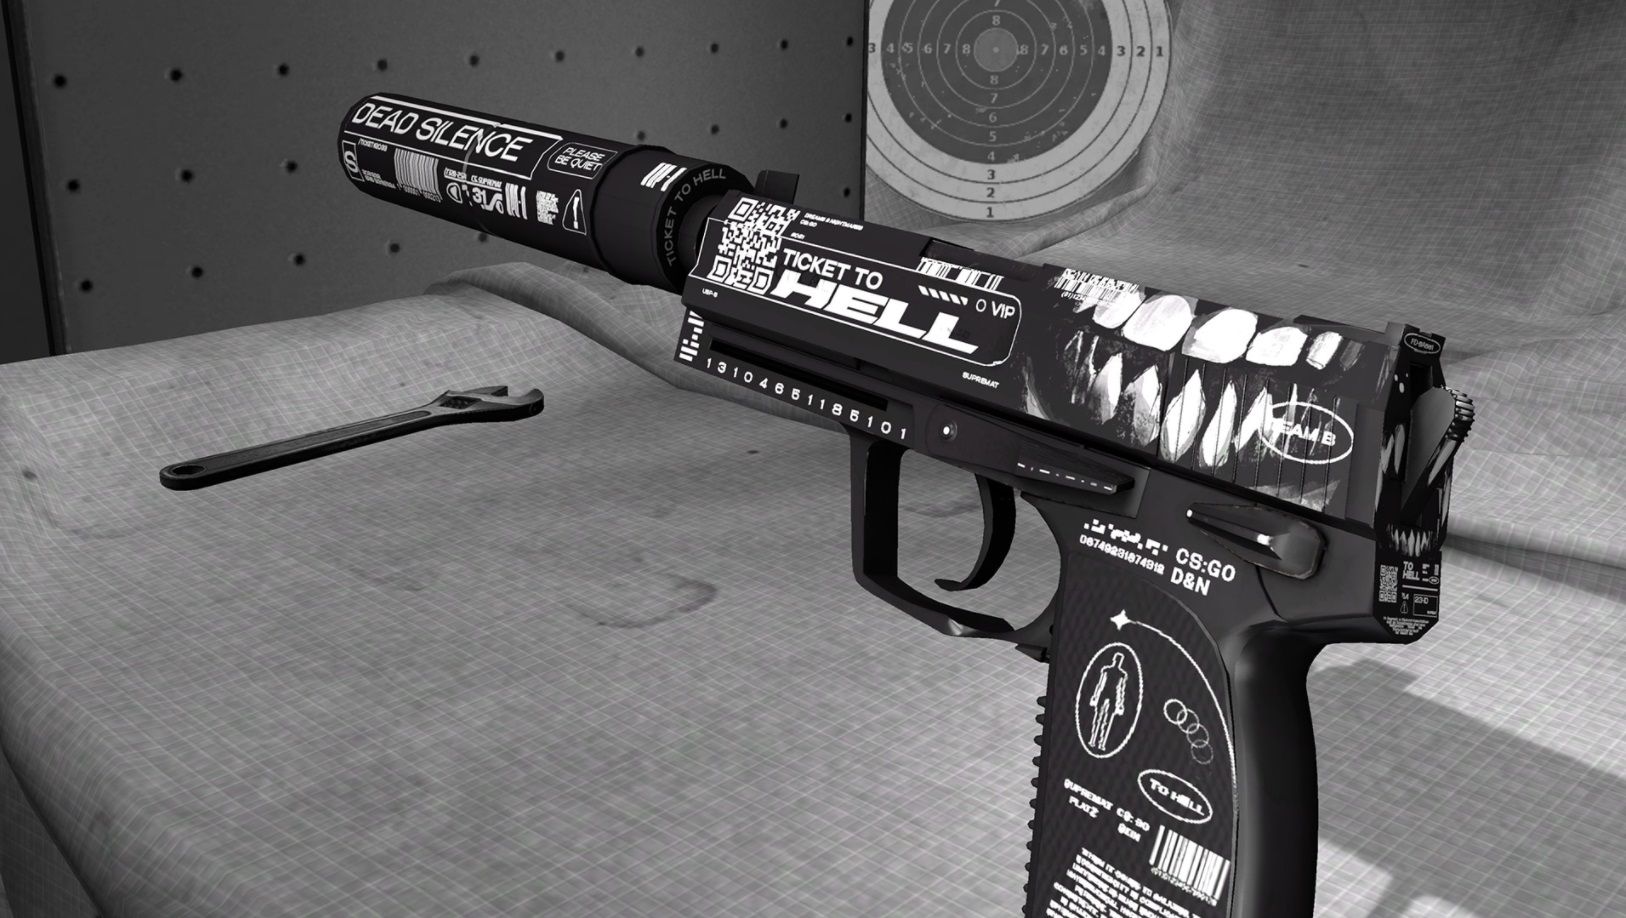 USP-S | Ticket to Hell